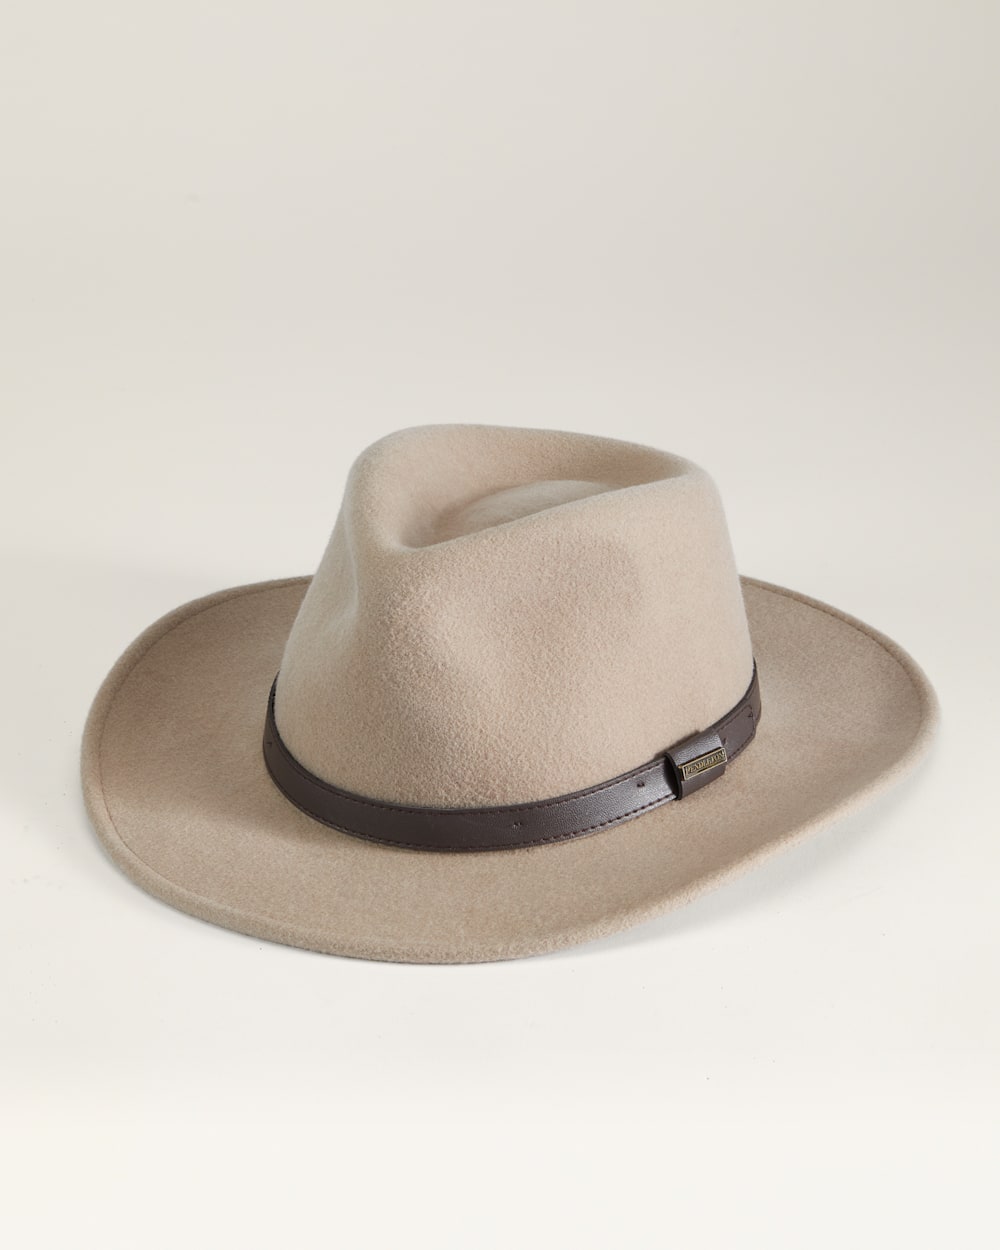 Water Resistant Wool Felt Outback | Hats for Men